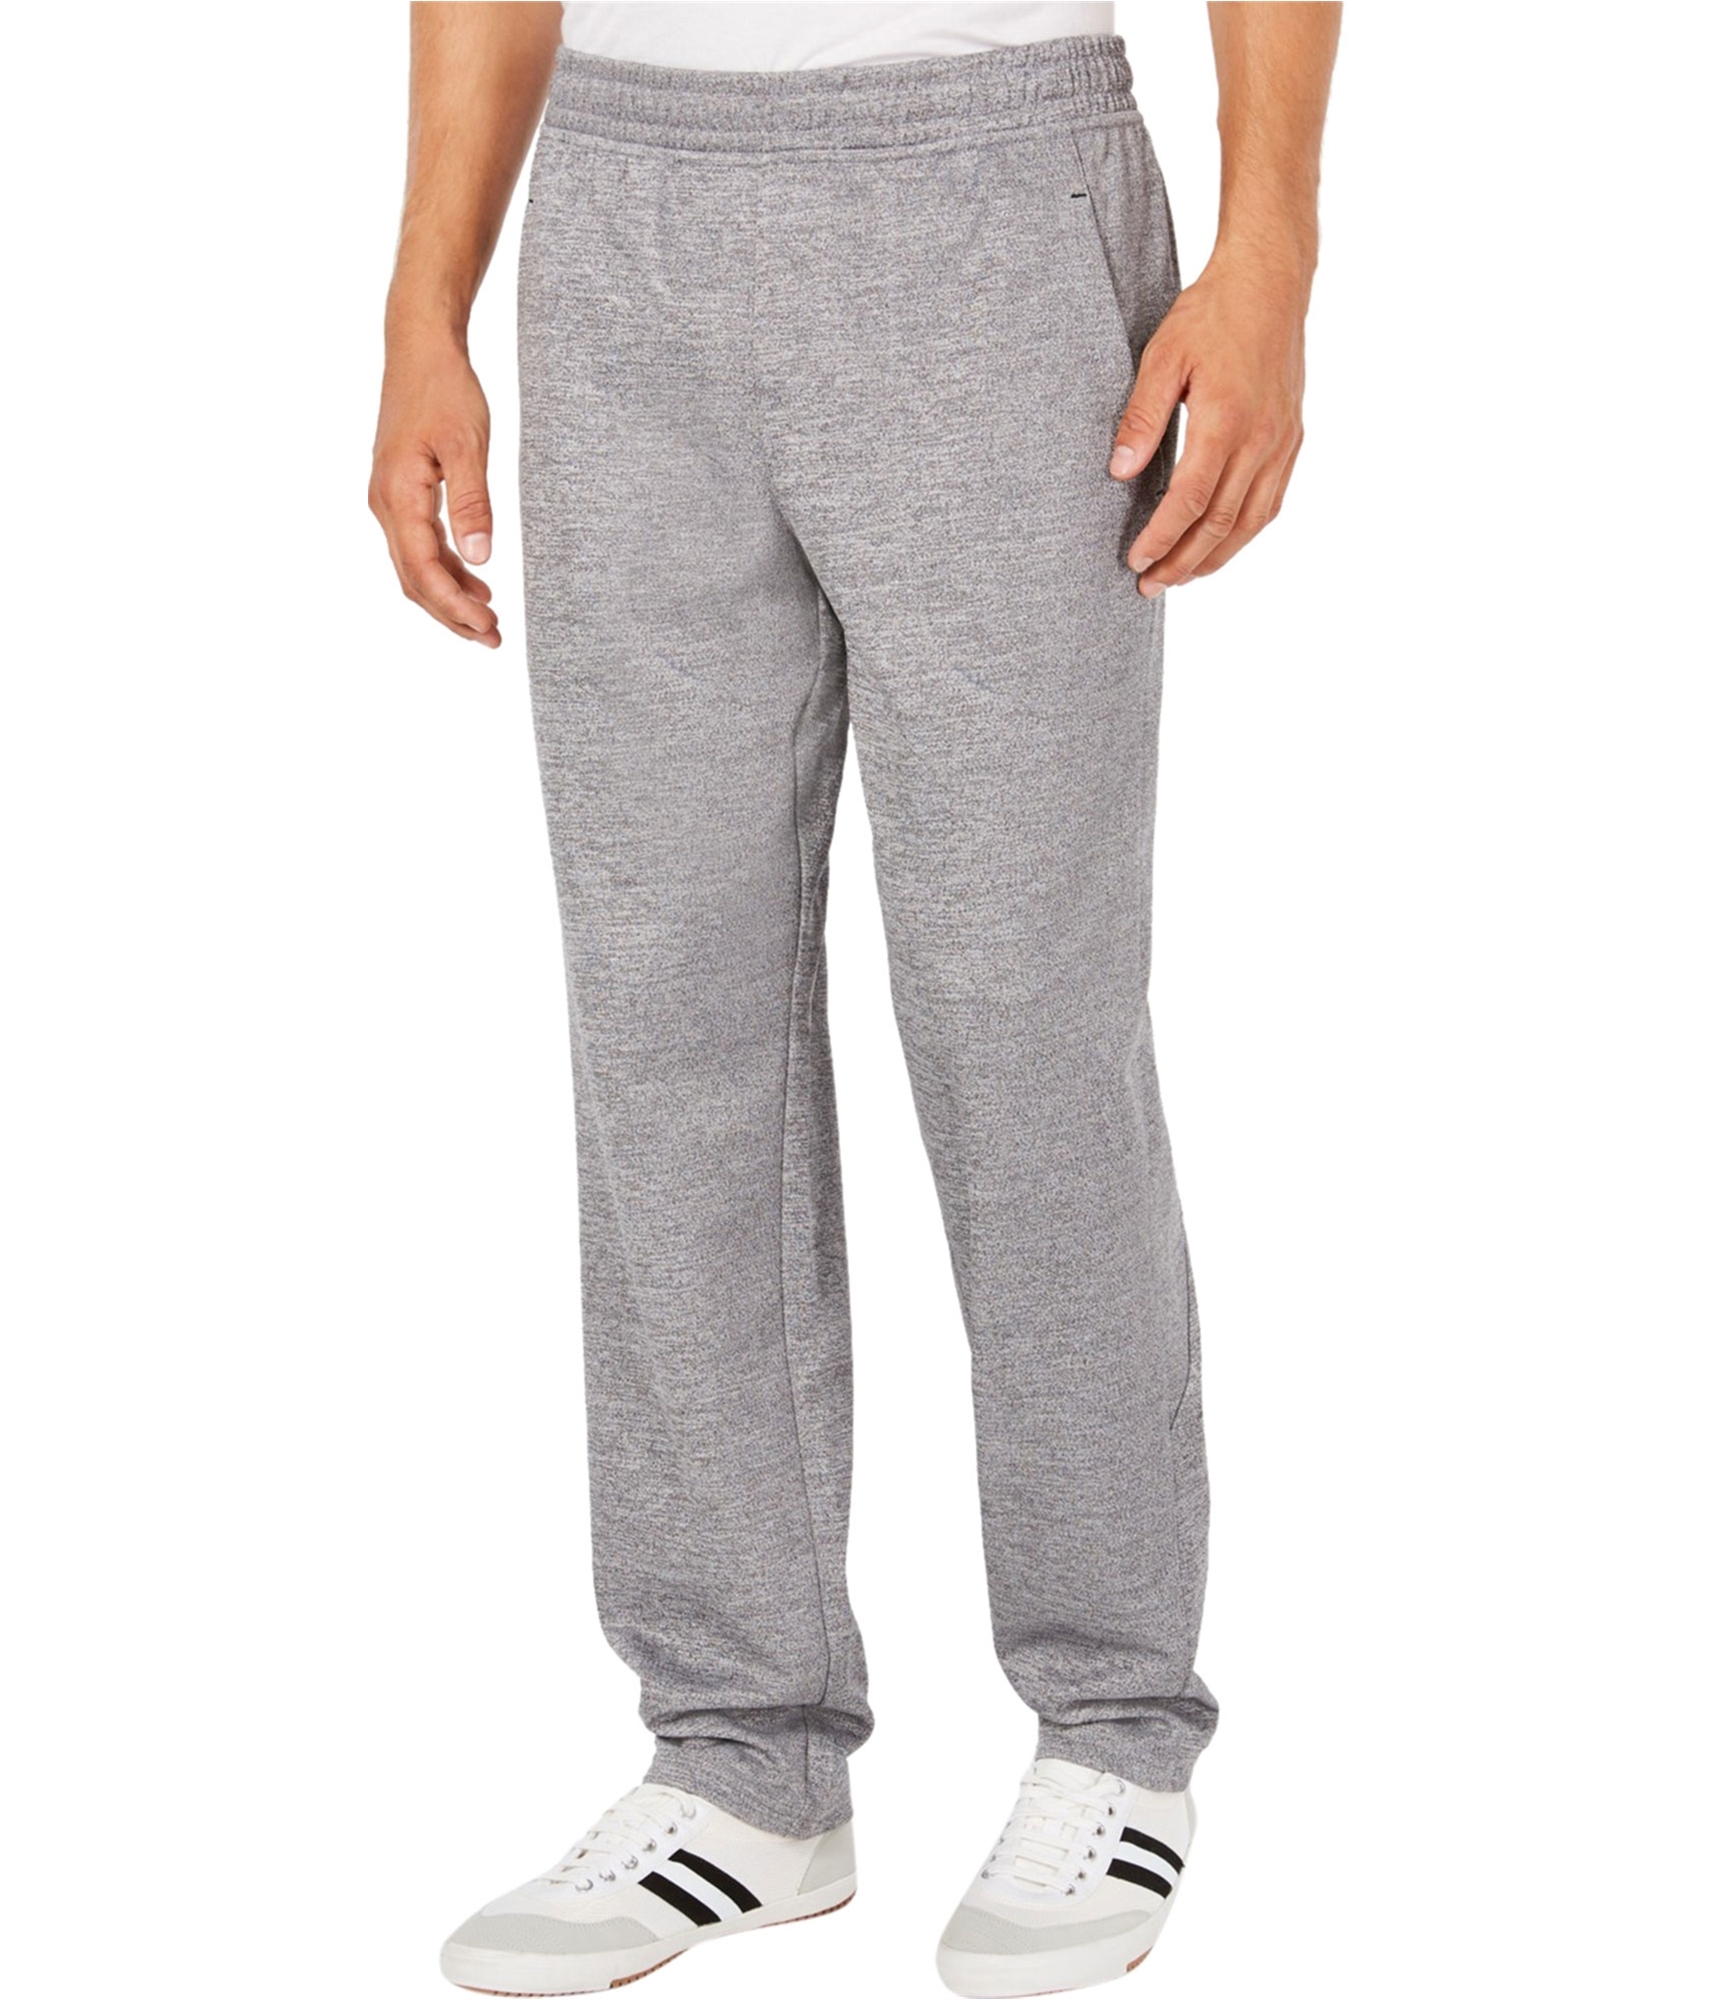 Buy a Mens Ideology Performance Casual Sweatpants Online | TagsWeekly.com